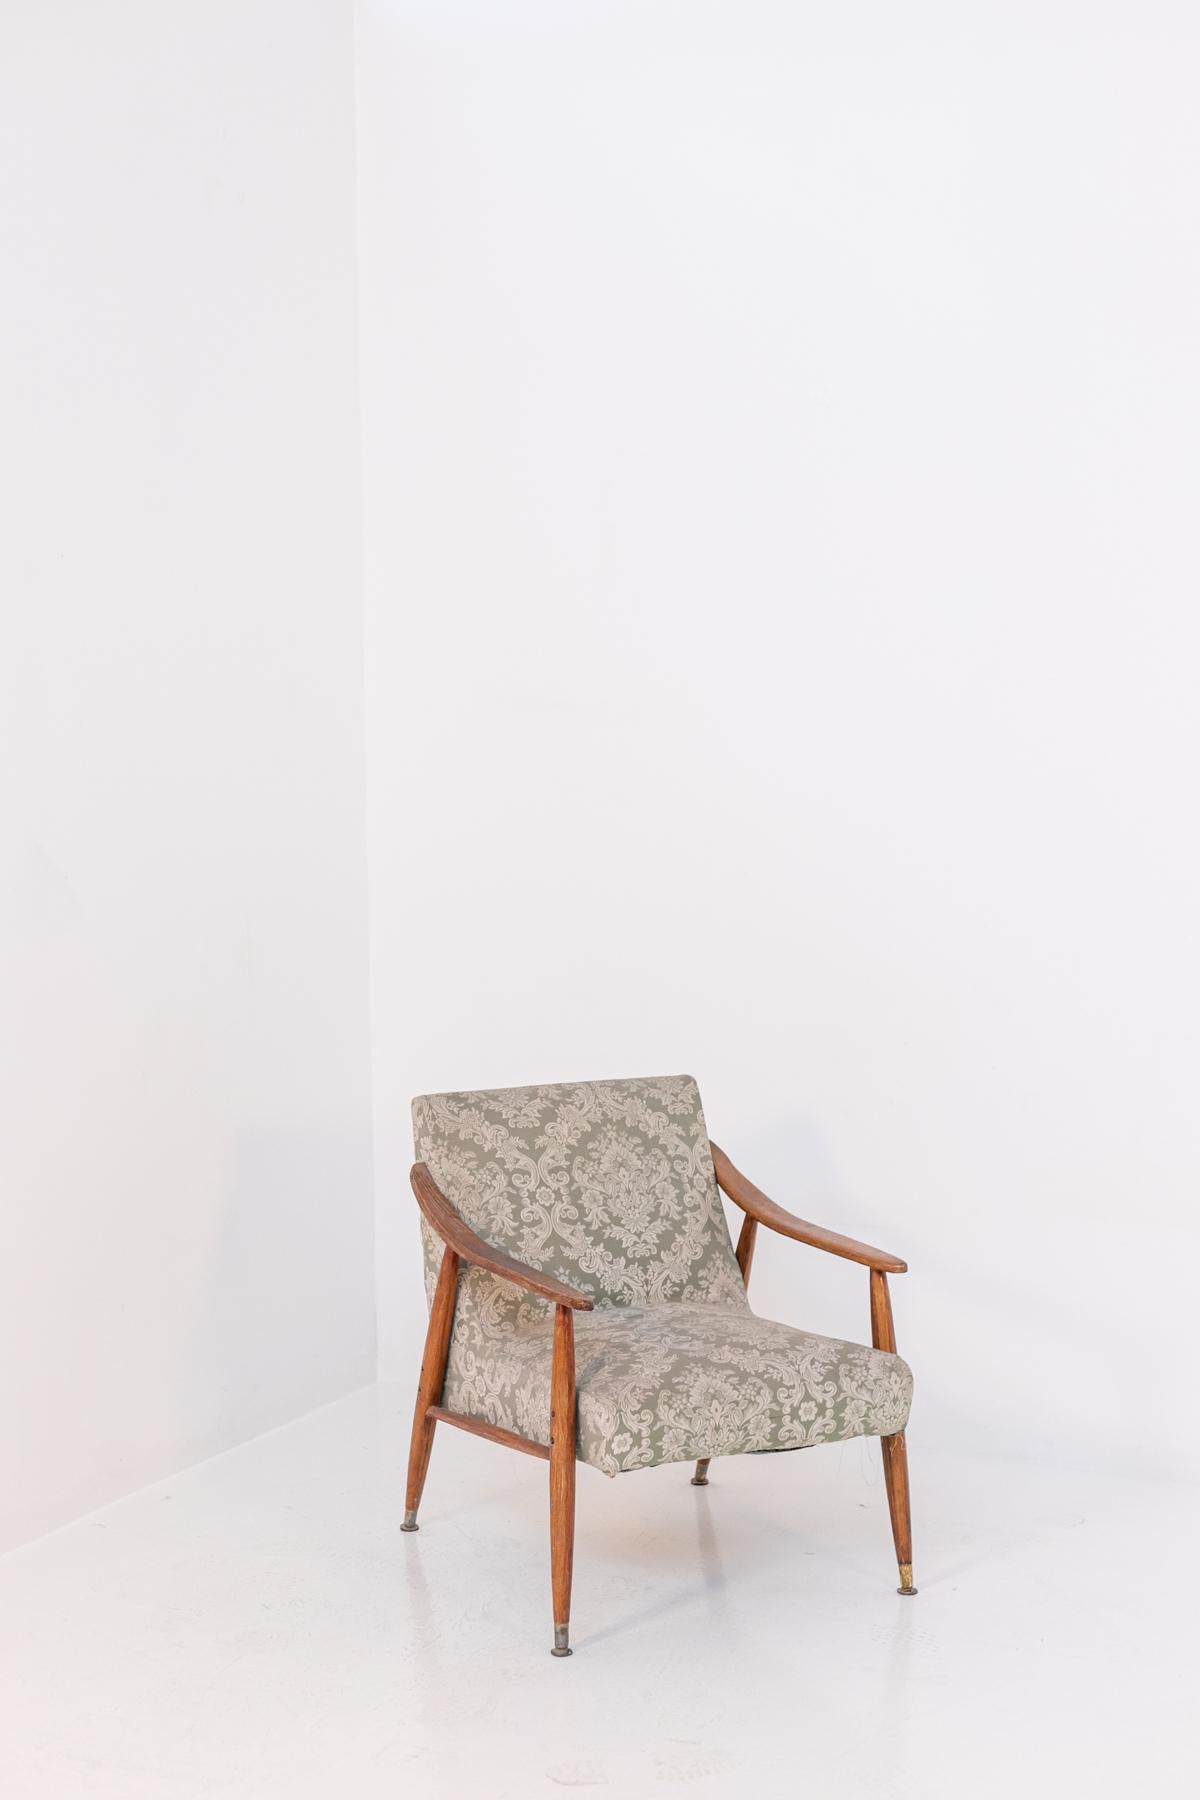 Nordic Armchair in Wood and Damask Fabric For Sale 1